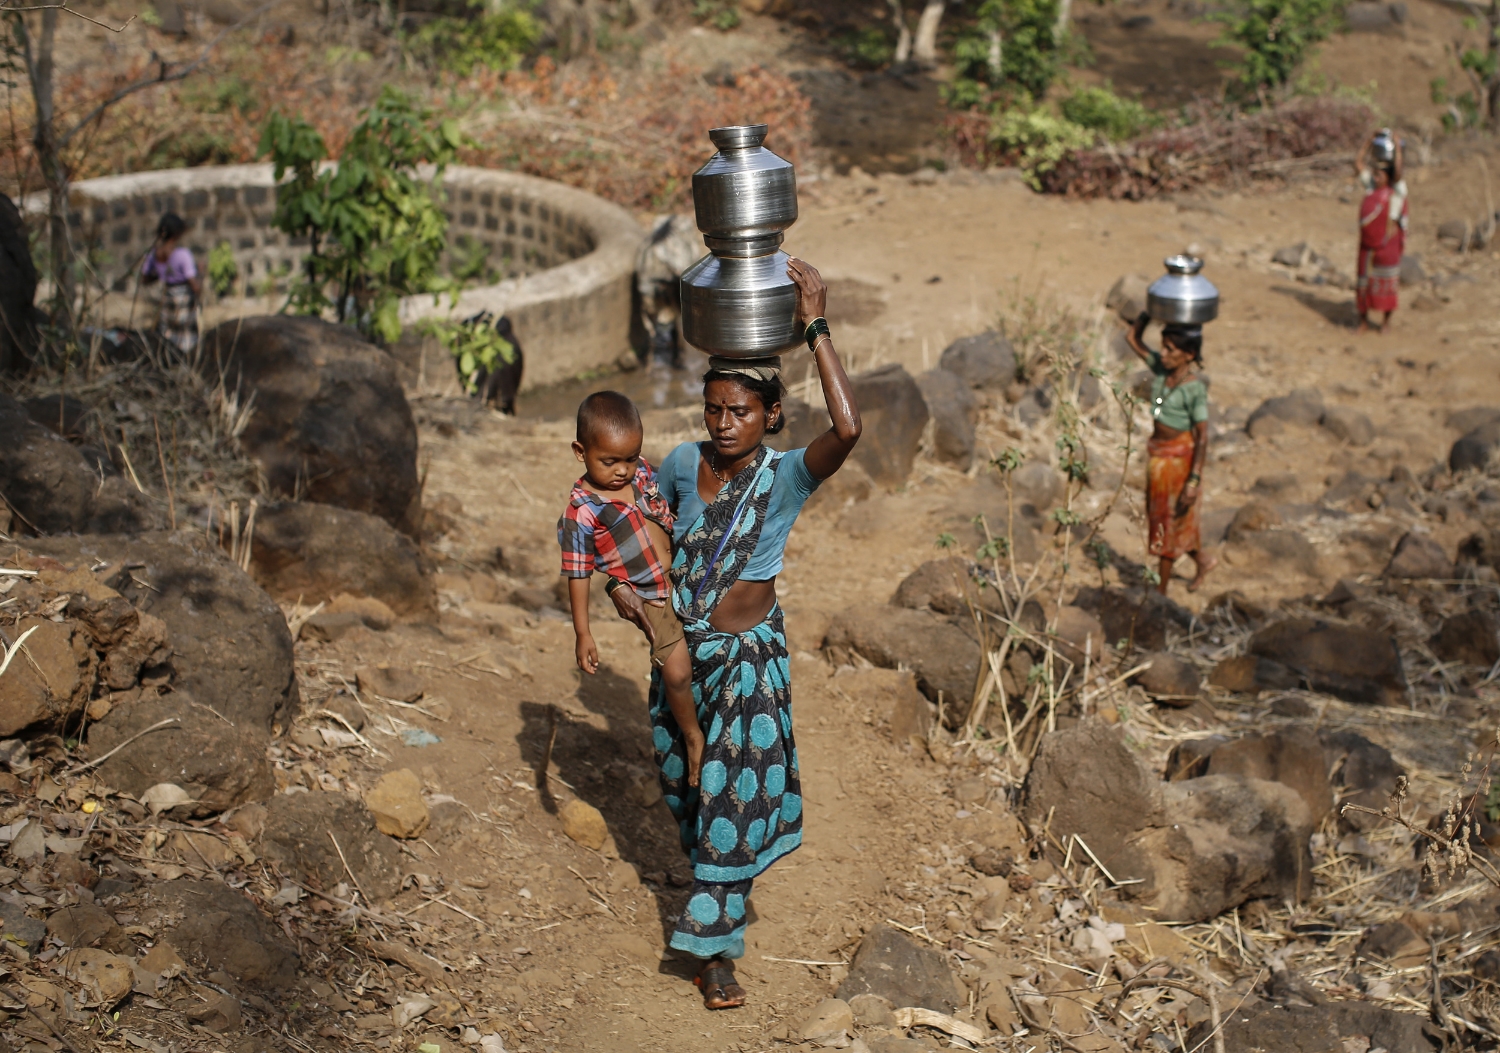  Shivarti, second wife of Namdeo, carries her grandson while carrying metal pitchers filled with water from a well outside Denganmal village. 